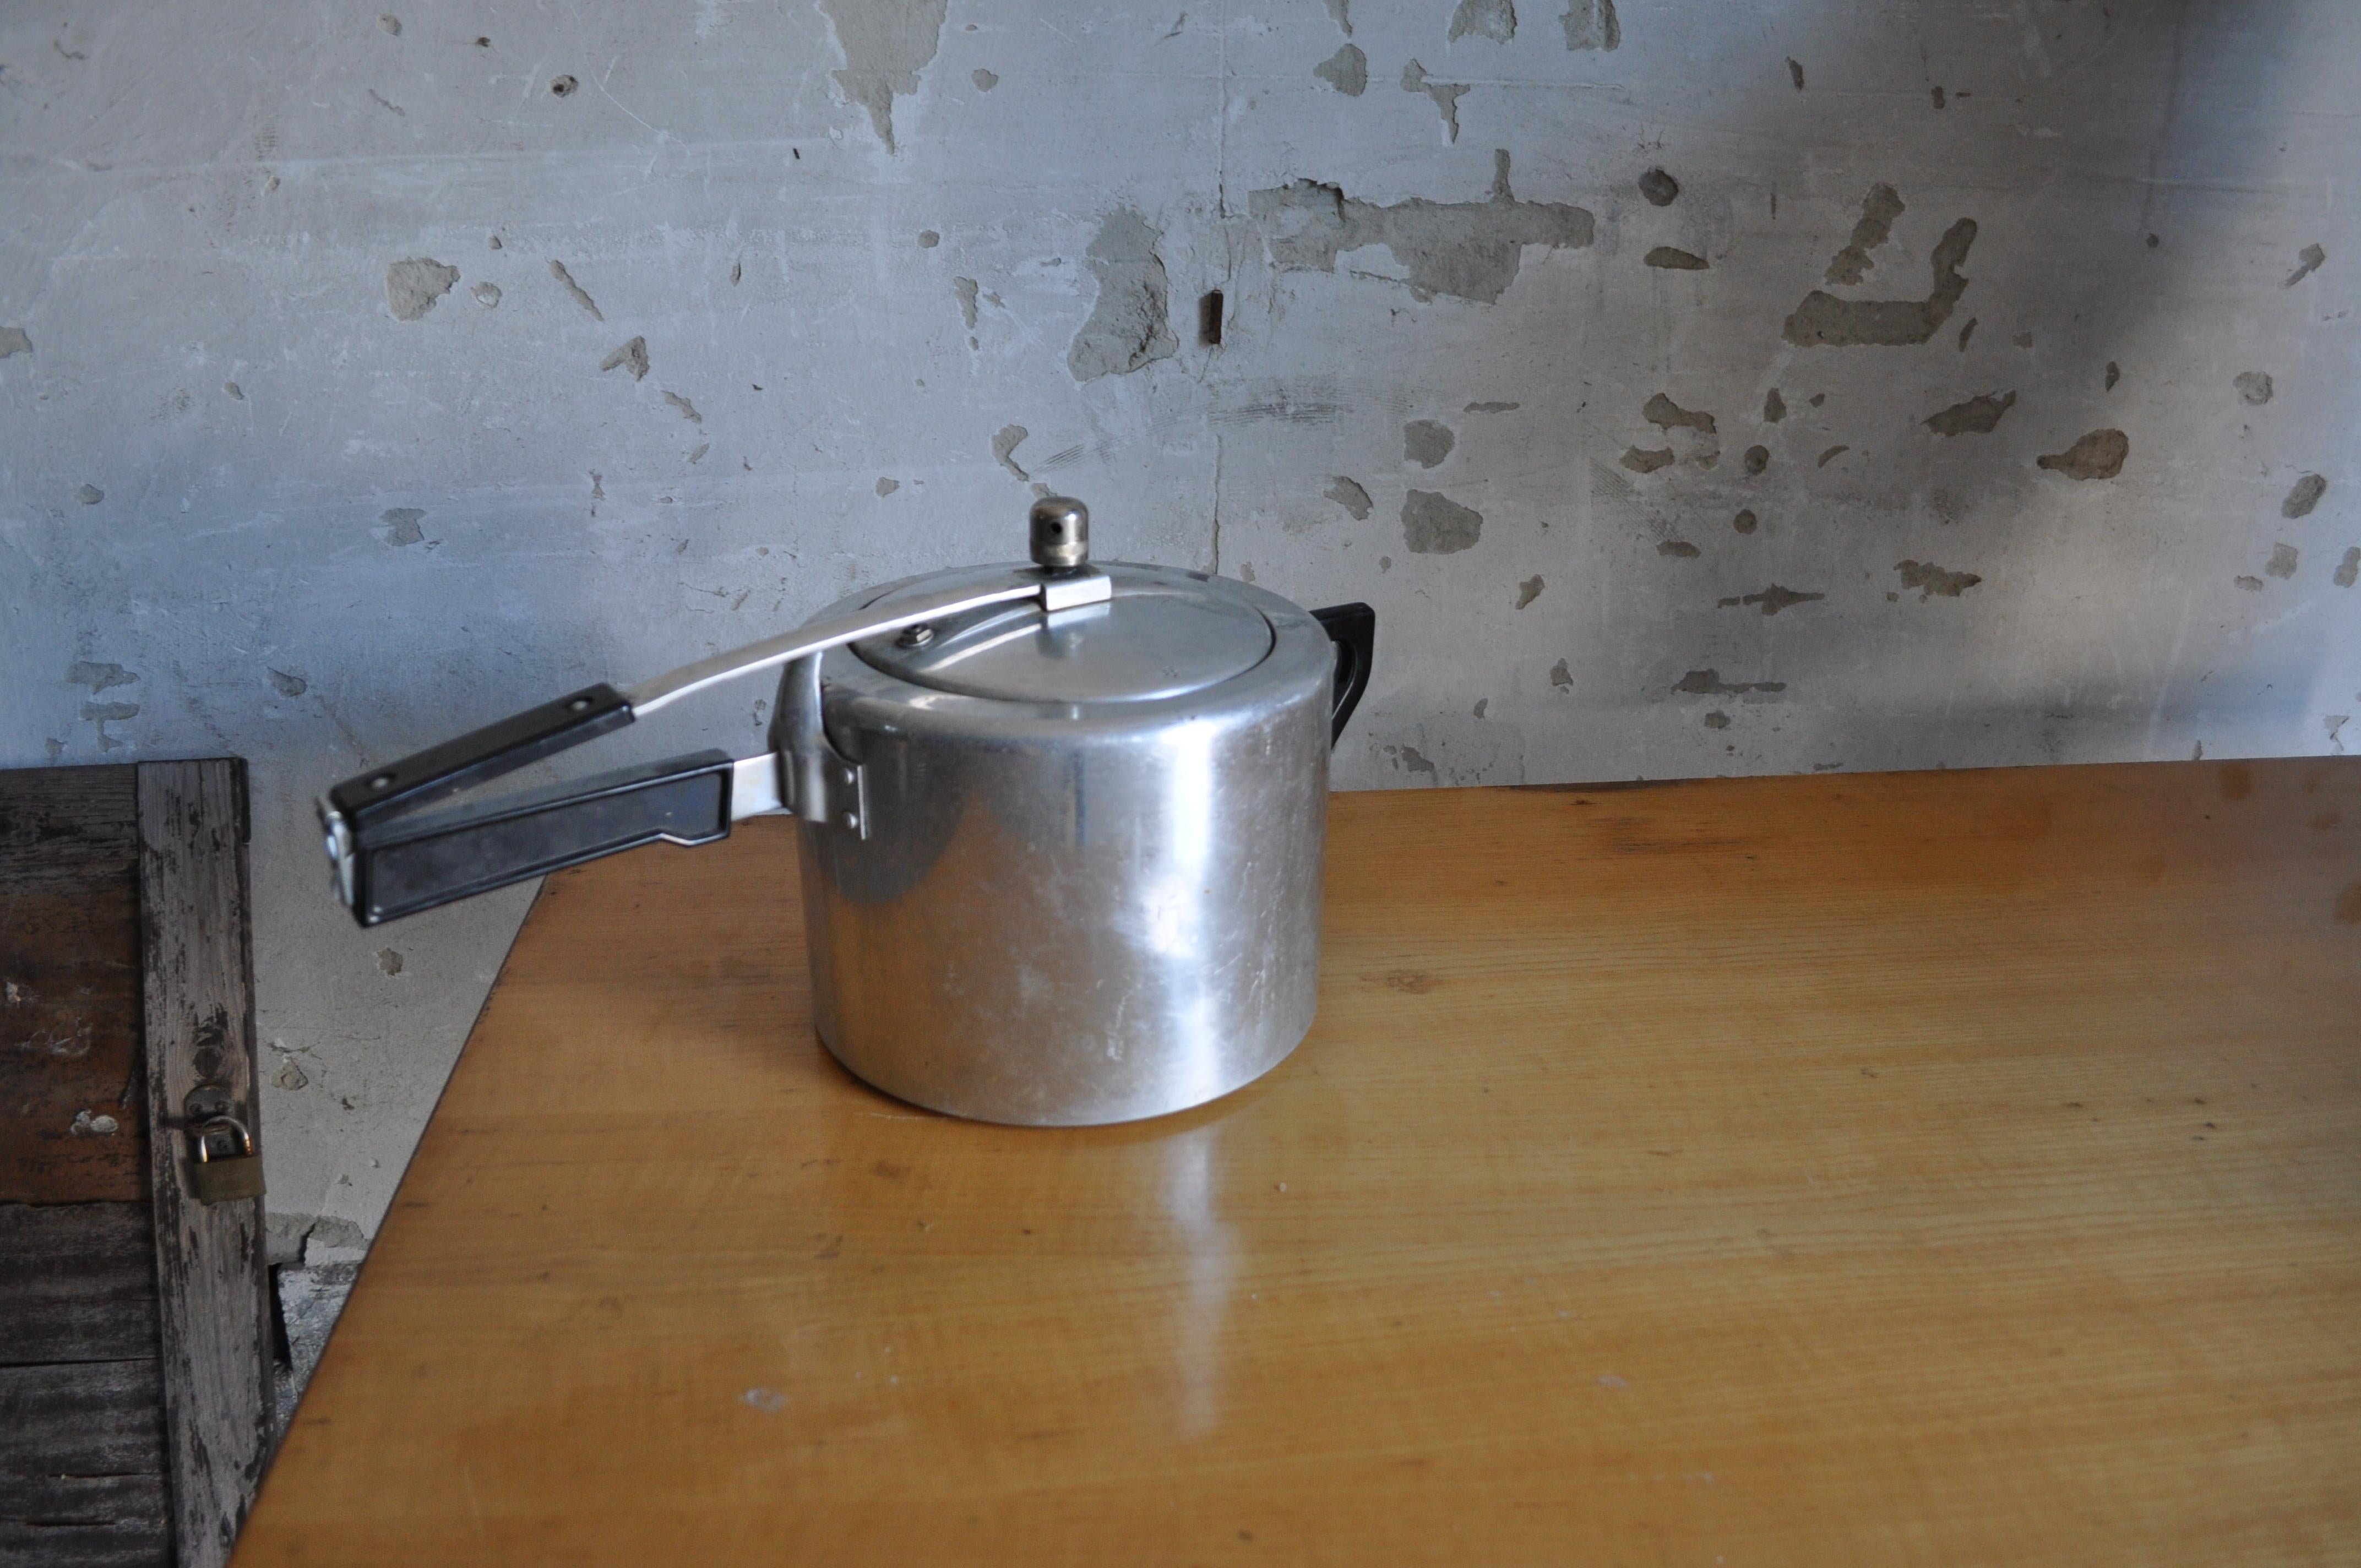 Vintage pressure cooker from Hungary .
Size: 47 x 19 H 27 D.